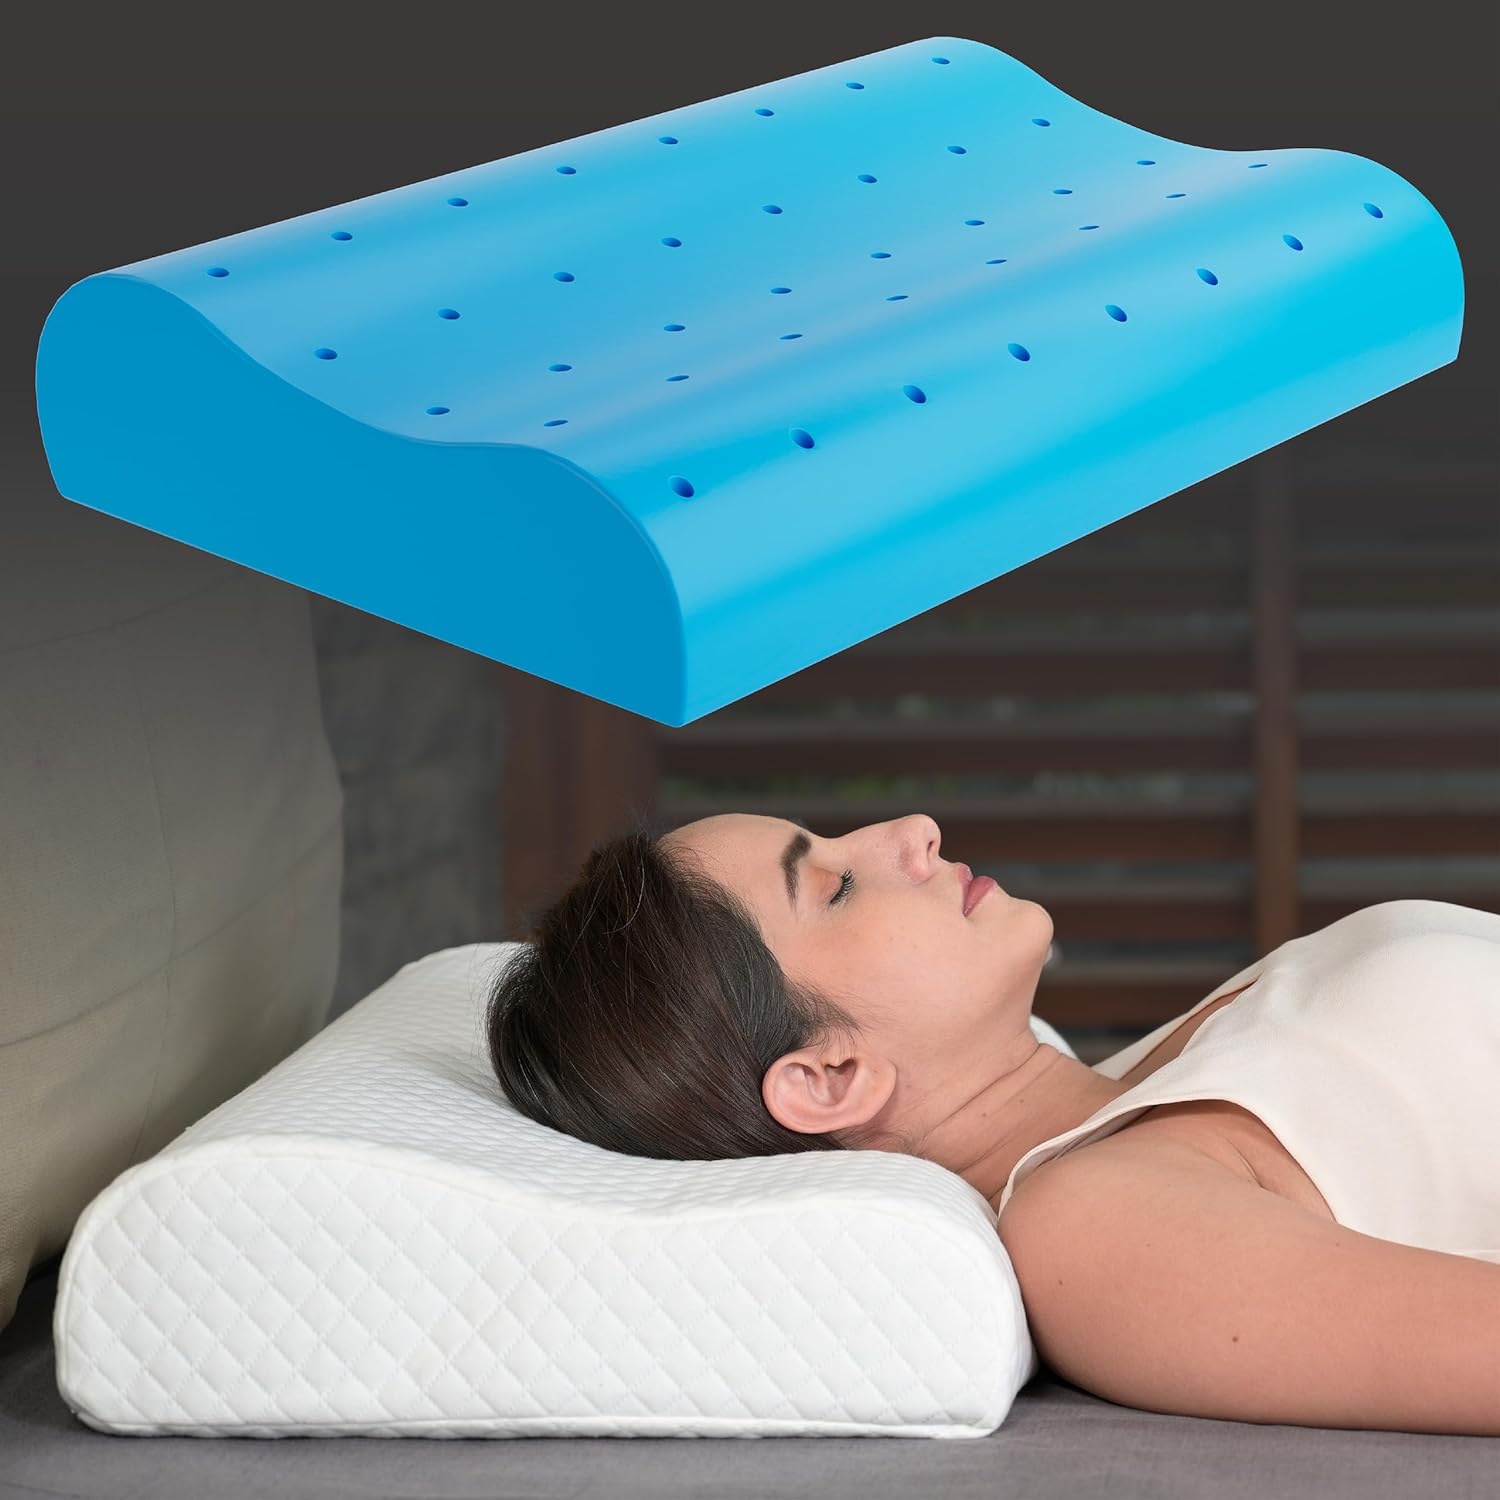 GELRIDE Orthopedic Gel Donut Seat Cushion, Piles Pillow for Hemorrhoids, Pain Relief for Piles, Coccyx, Prostate, Sciatica, Post-Natal, Pregnancy (